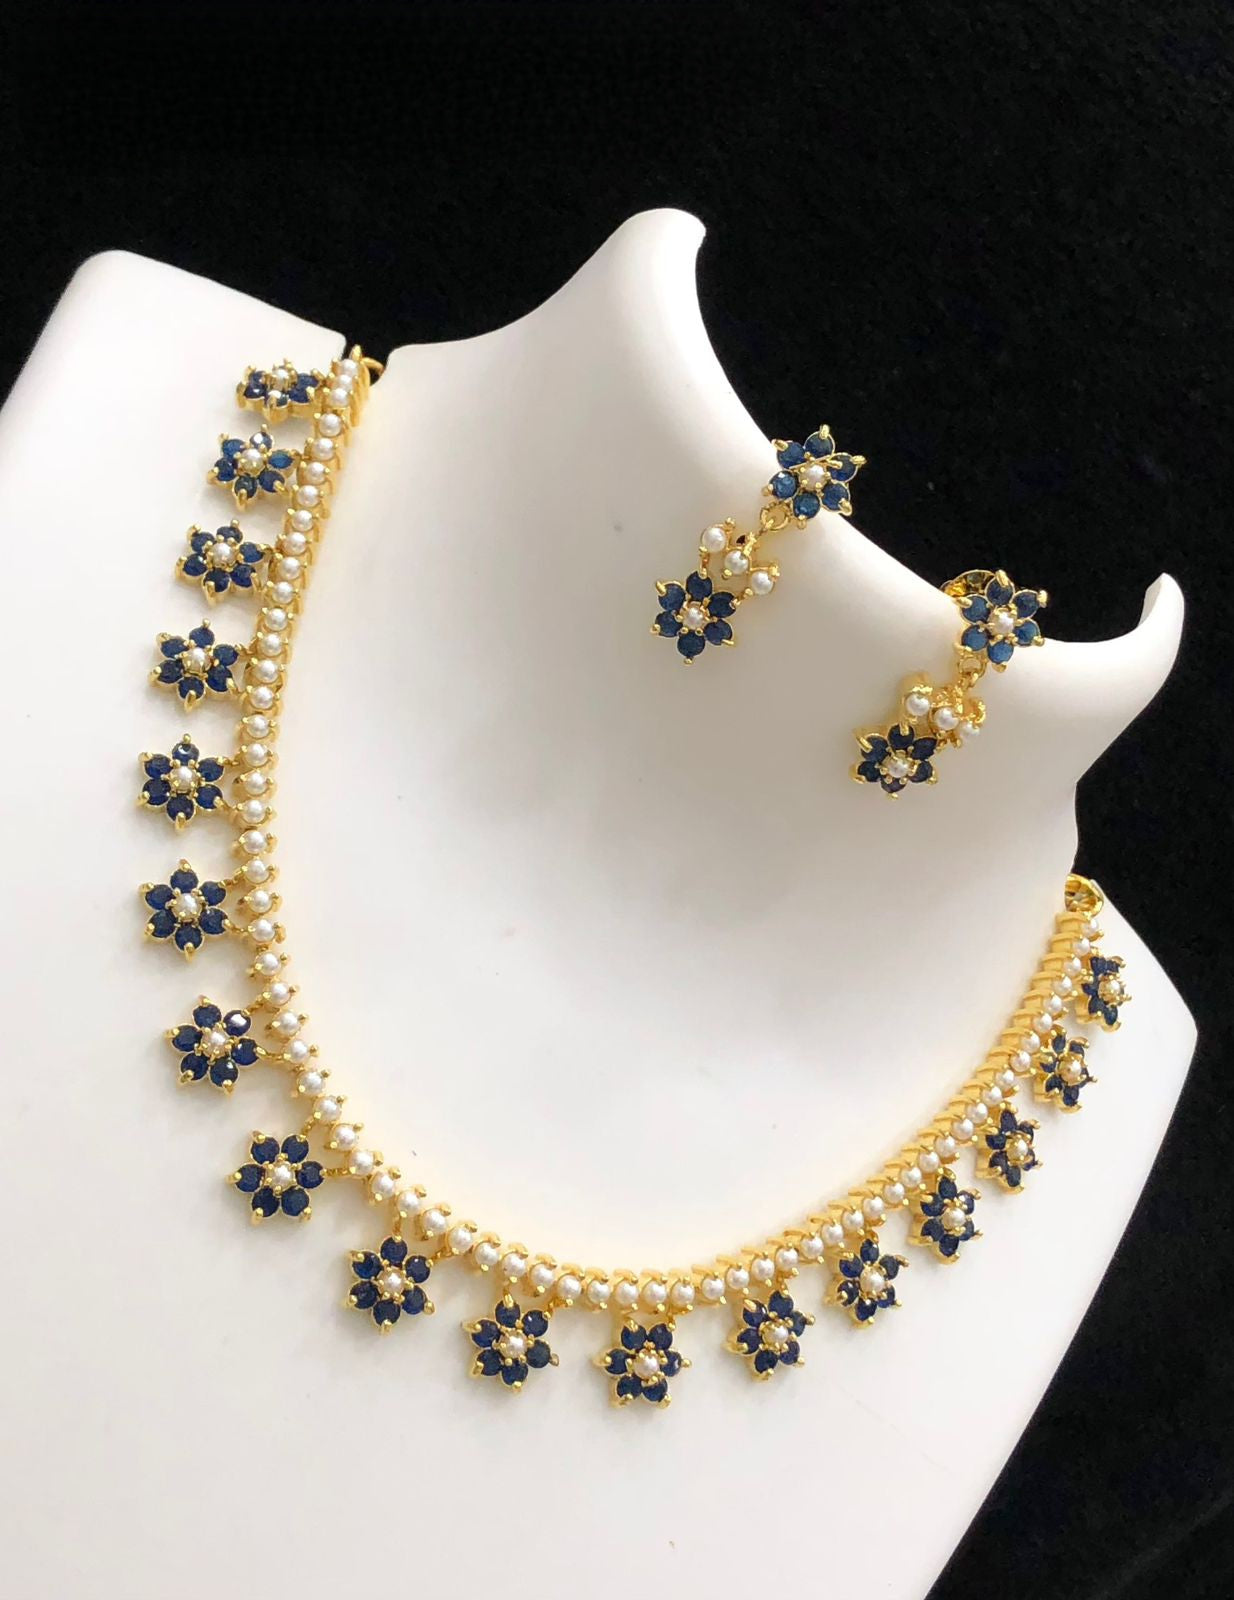 Gold Plated Floral Coral and Pearl small choker necklace Earrings | Sapphire Blue CZ stone flower necklace | Light weight Daily wear jewelry